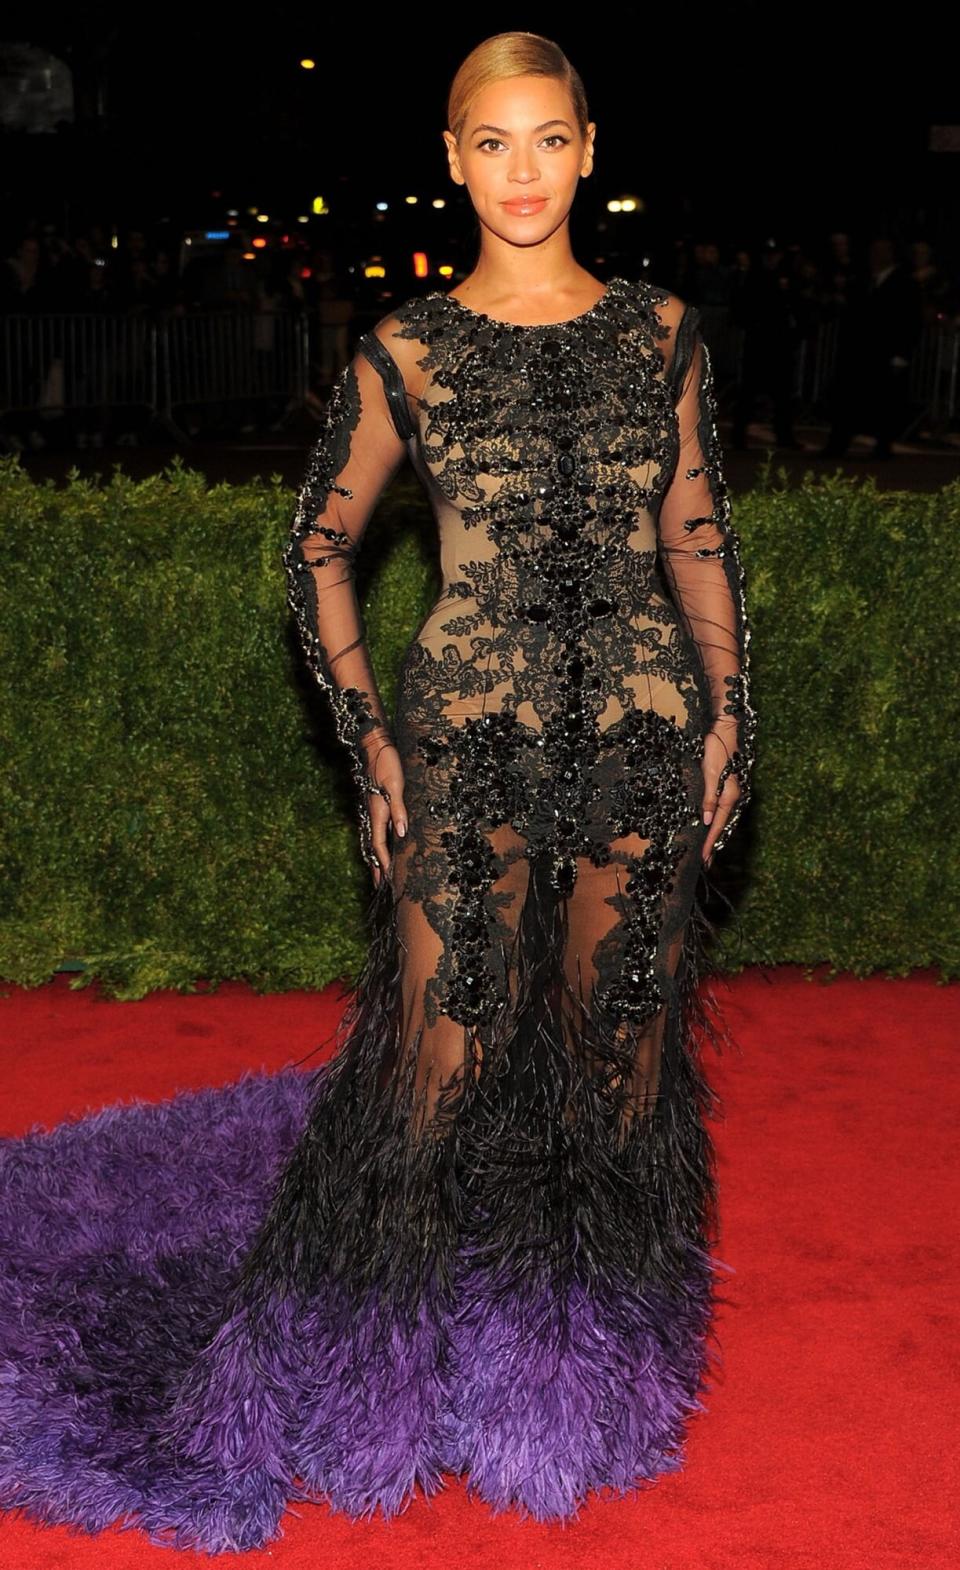 Beyonce Knowles attends the "Schiaparelli And Prada: Impossible Conversations" Costume Institute Gala